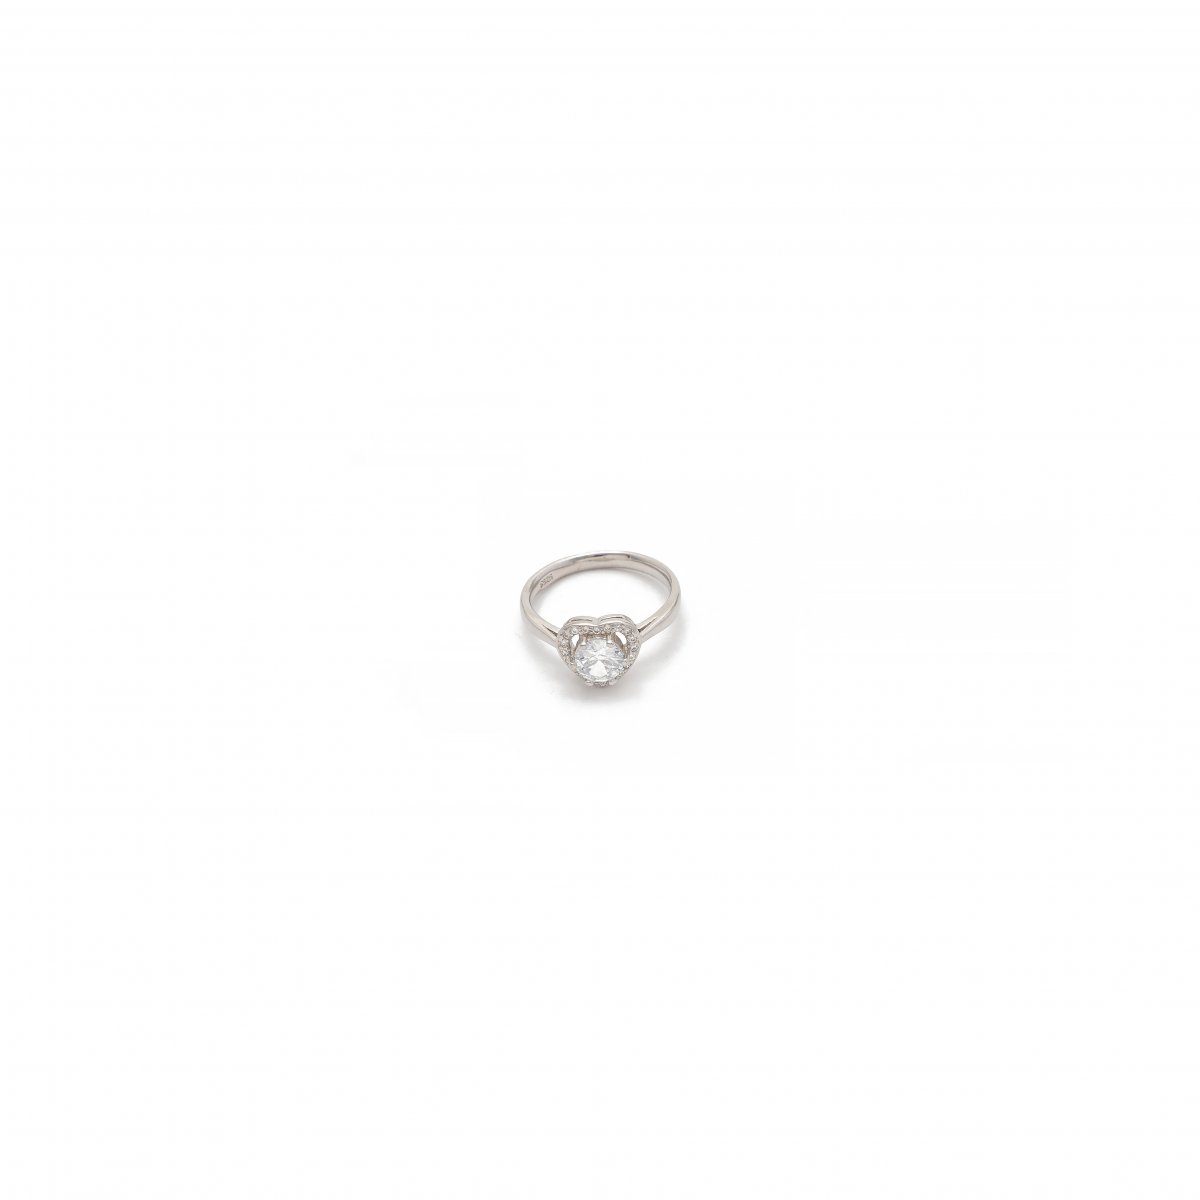 CZ 925 SQUARE STONE STERLING SILVER RING FOR WOMEN